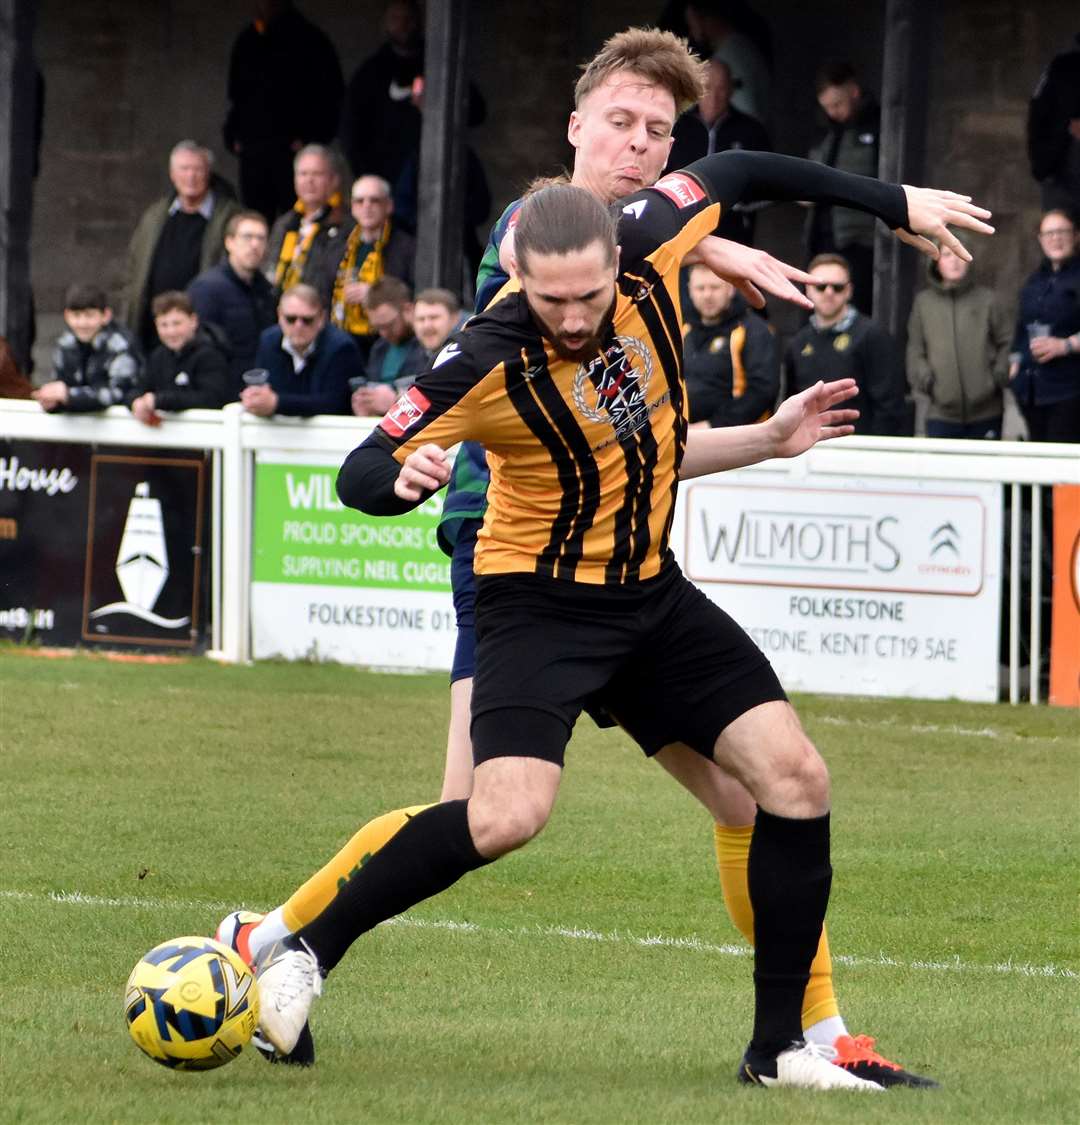 Folkestone forward Tom Derry in action. Picture: Randolph File